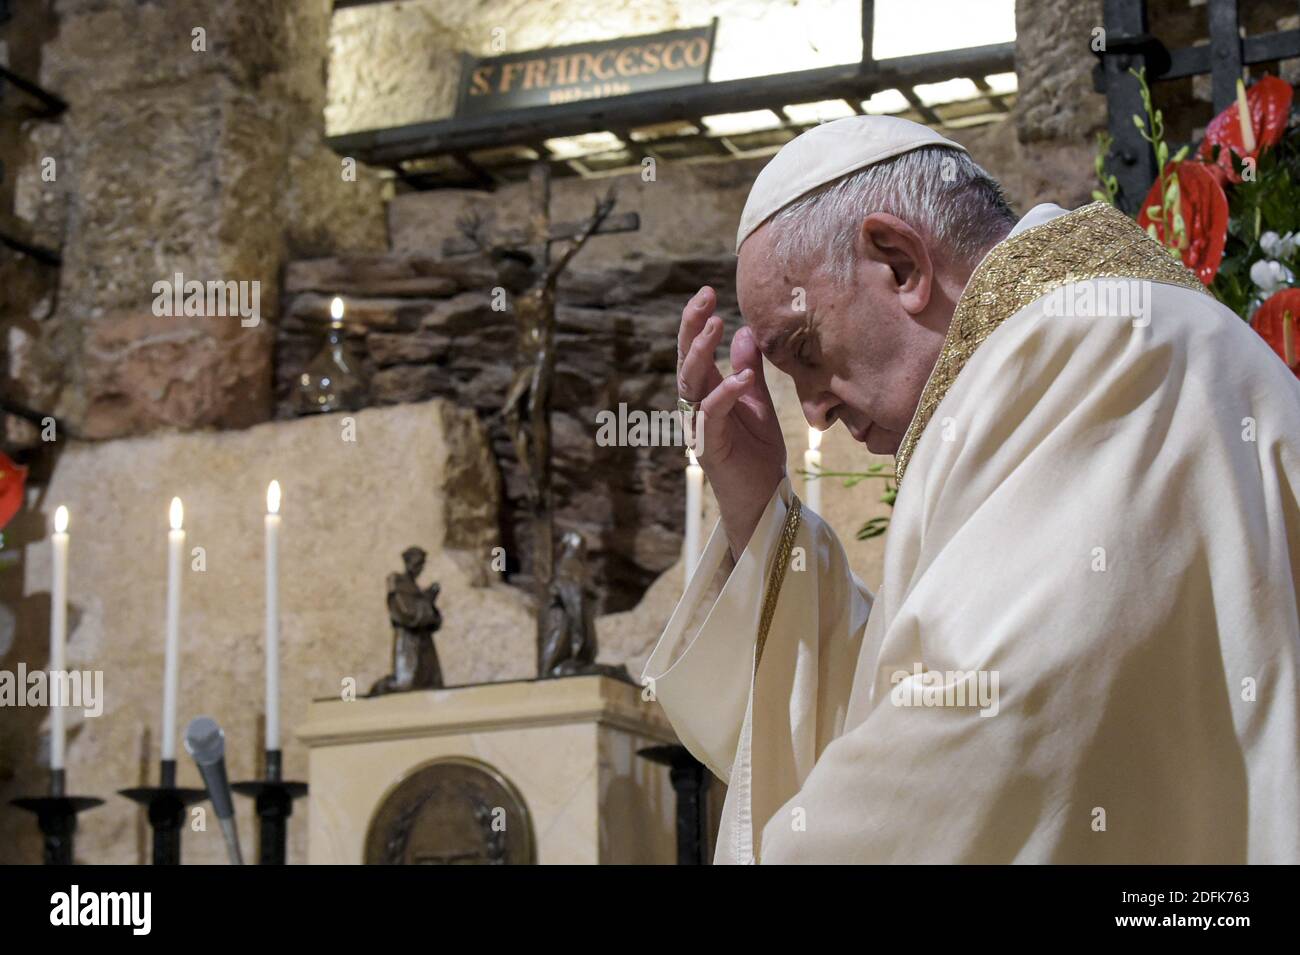 Pope Francis signed his new encyclical, 'Fratelli tutti', during a visit to  Assisi, Italy on October 3, 2020. In his first official trip outside Rome  since the pandemic struck Italy, the pope